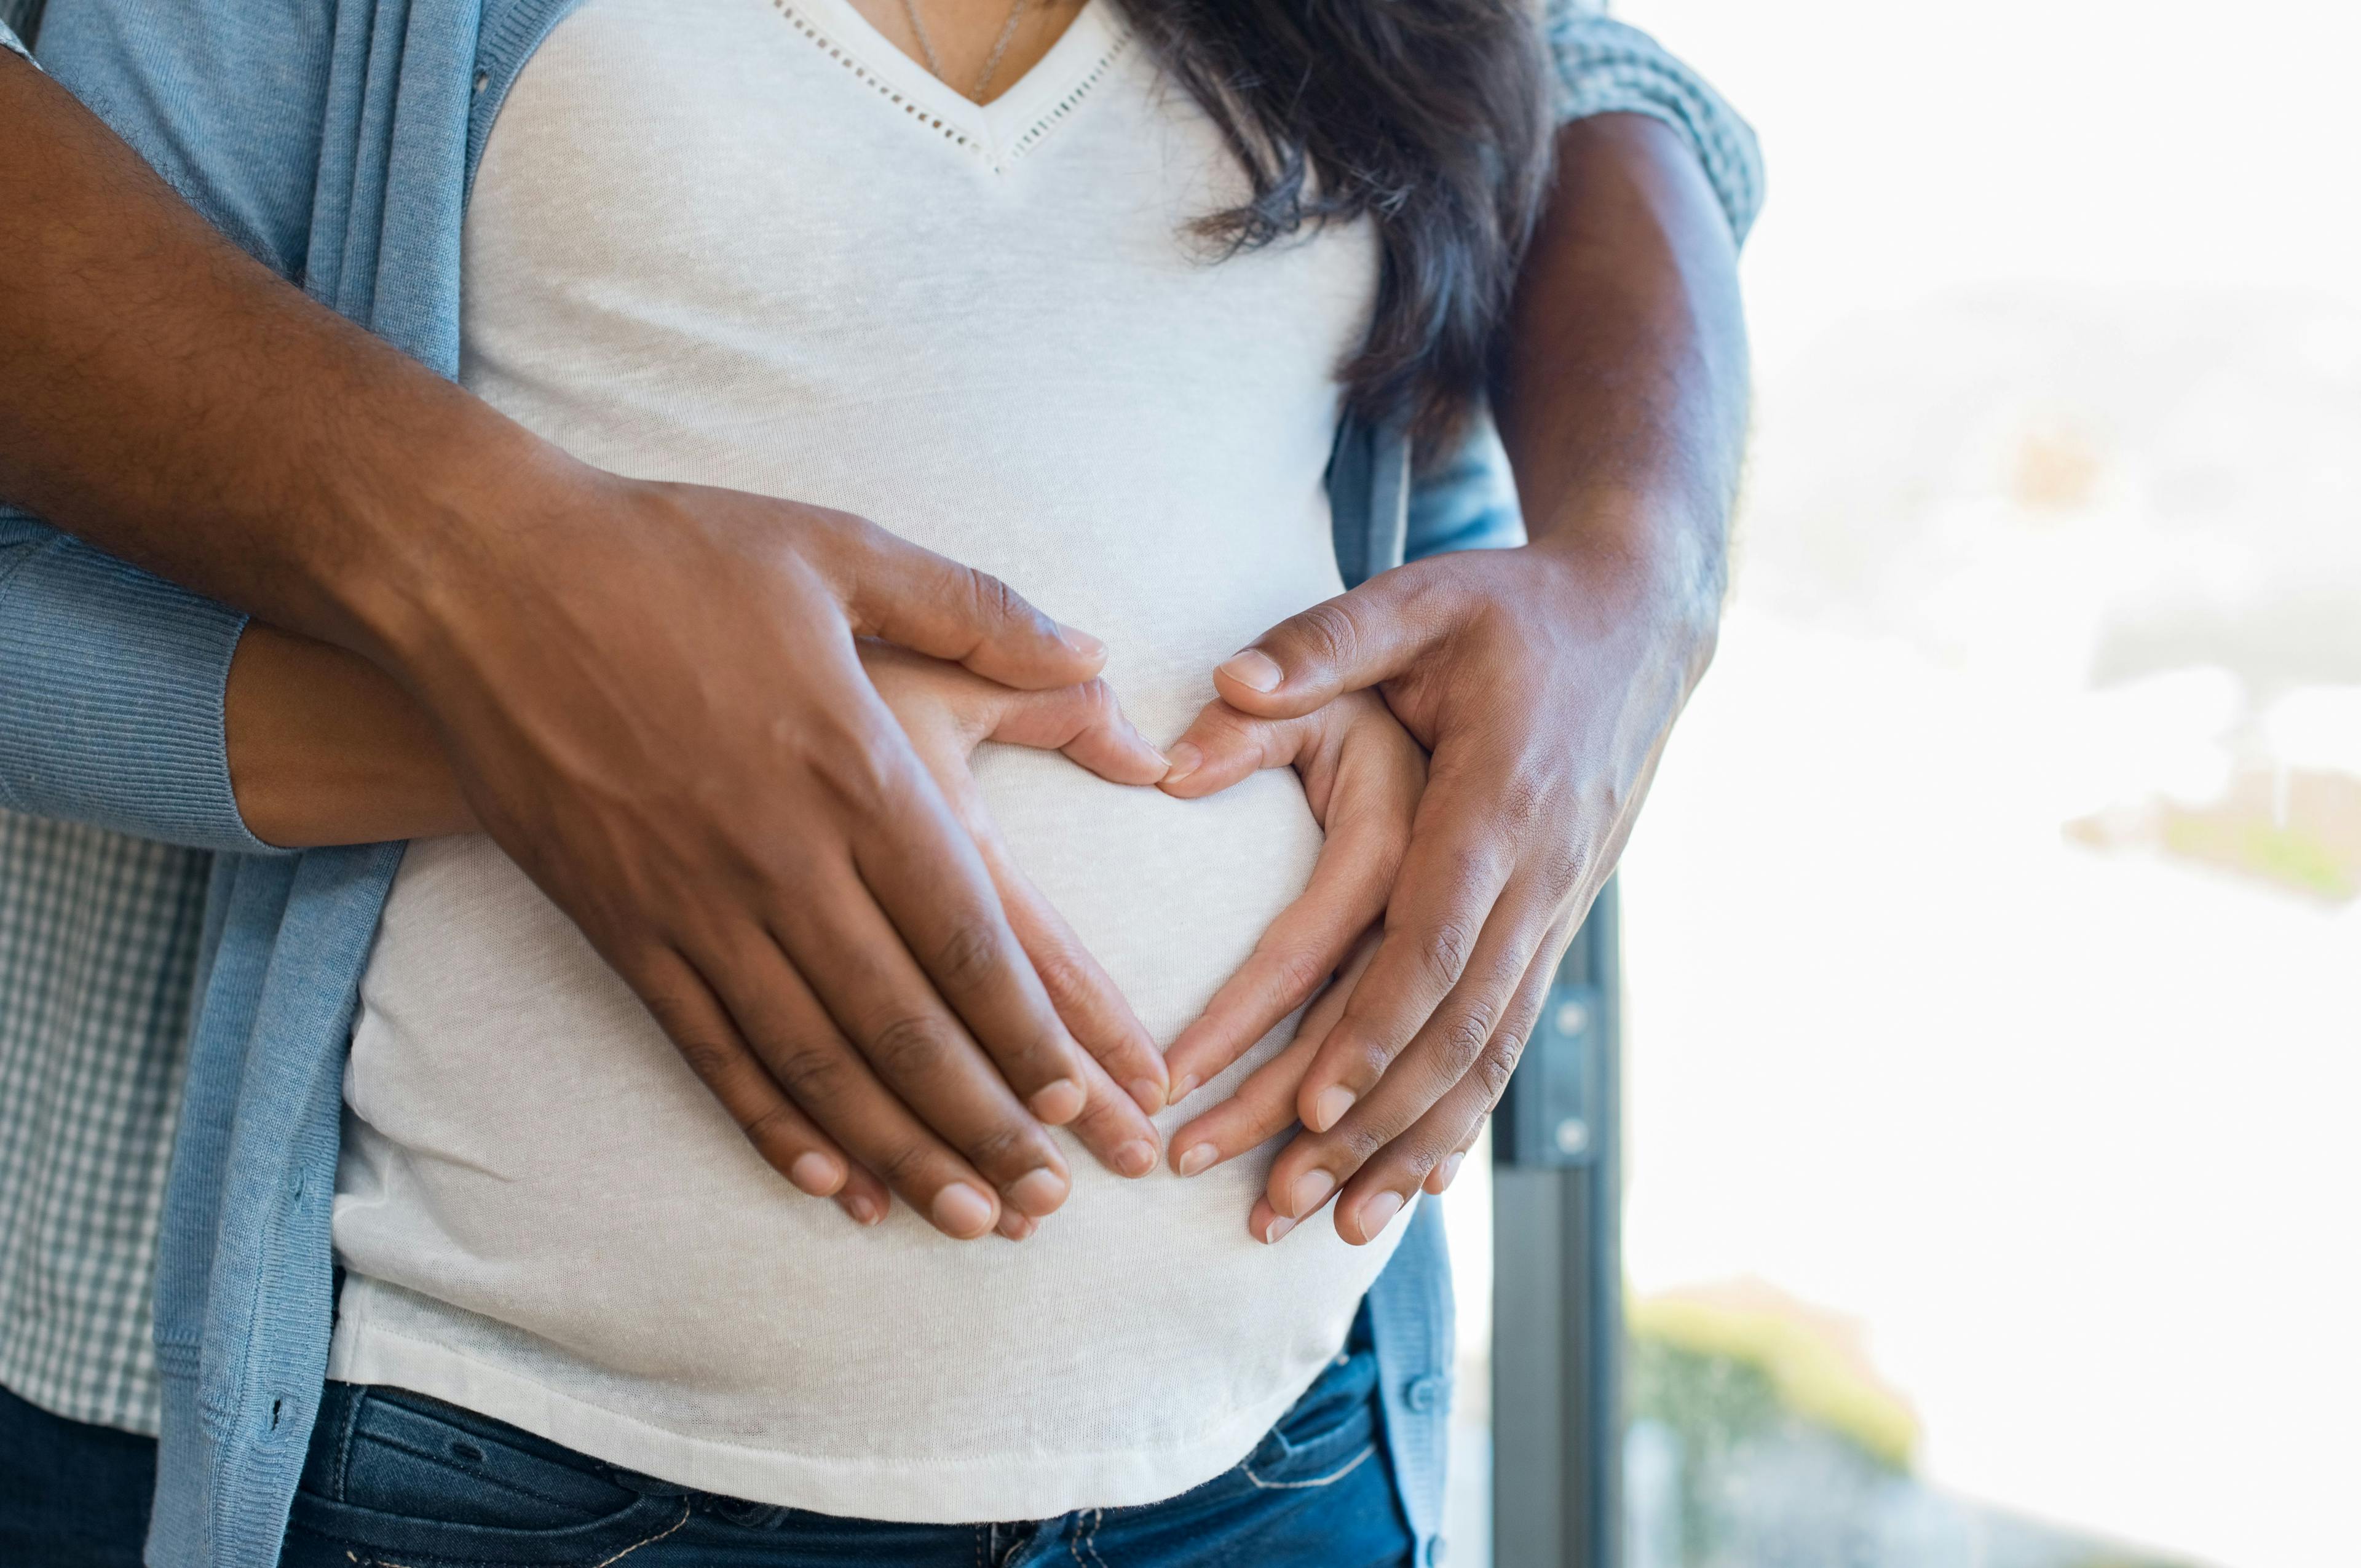 Pregnant Women with Skin Conditions May Require Dermatologic Intervention